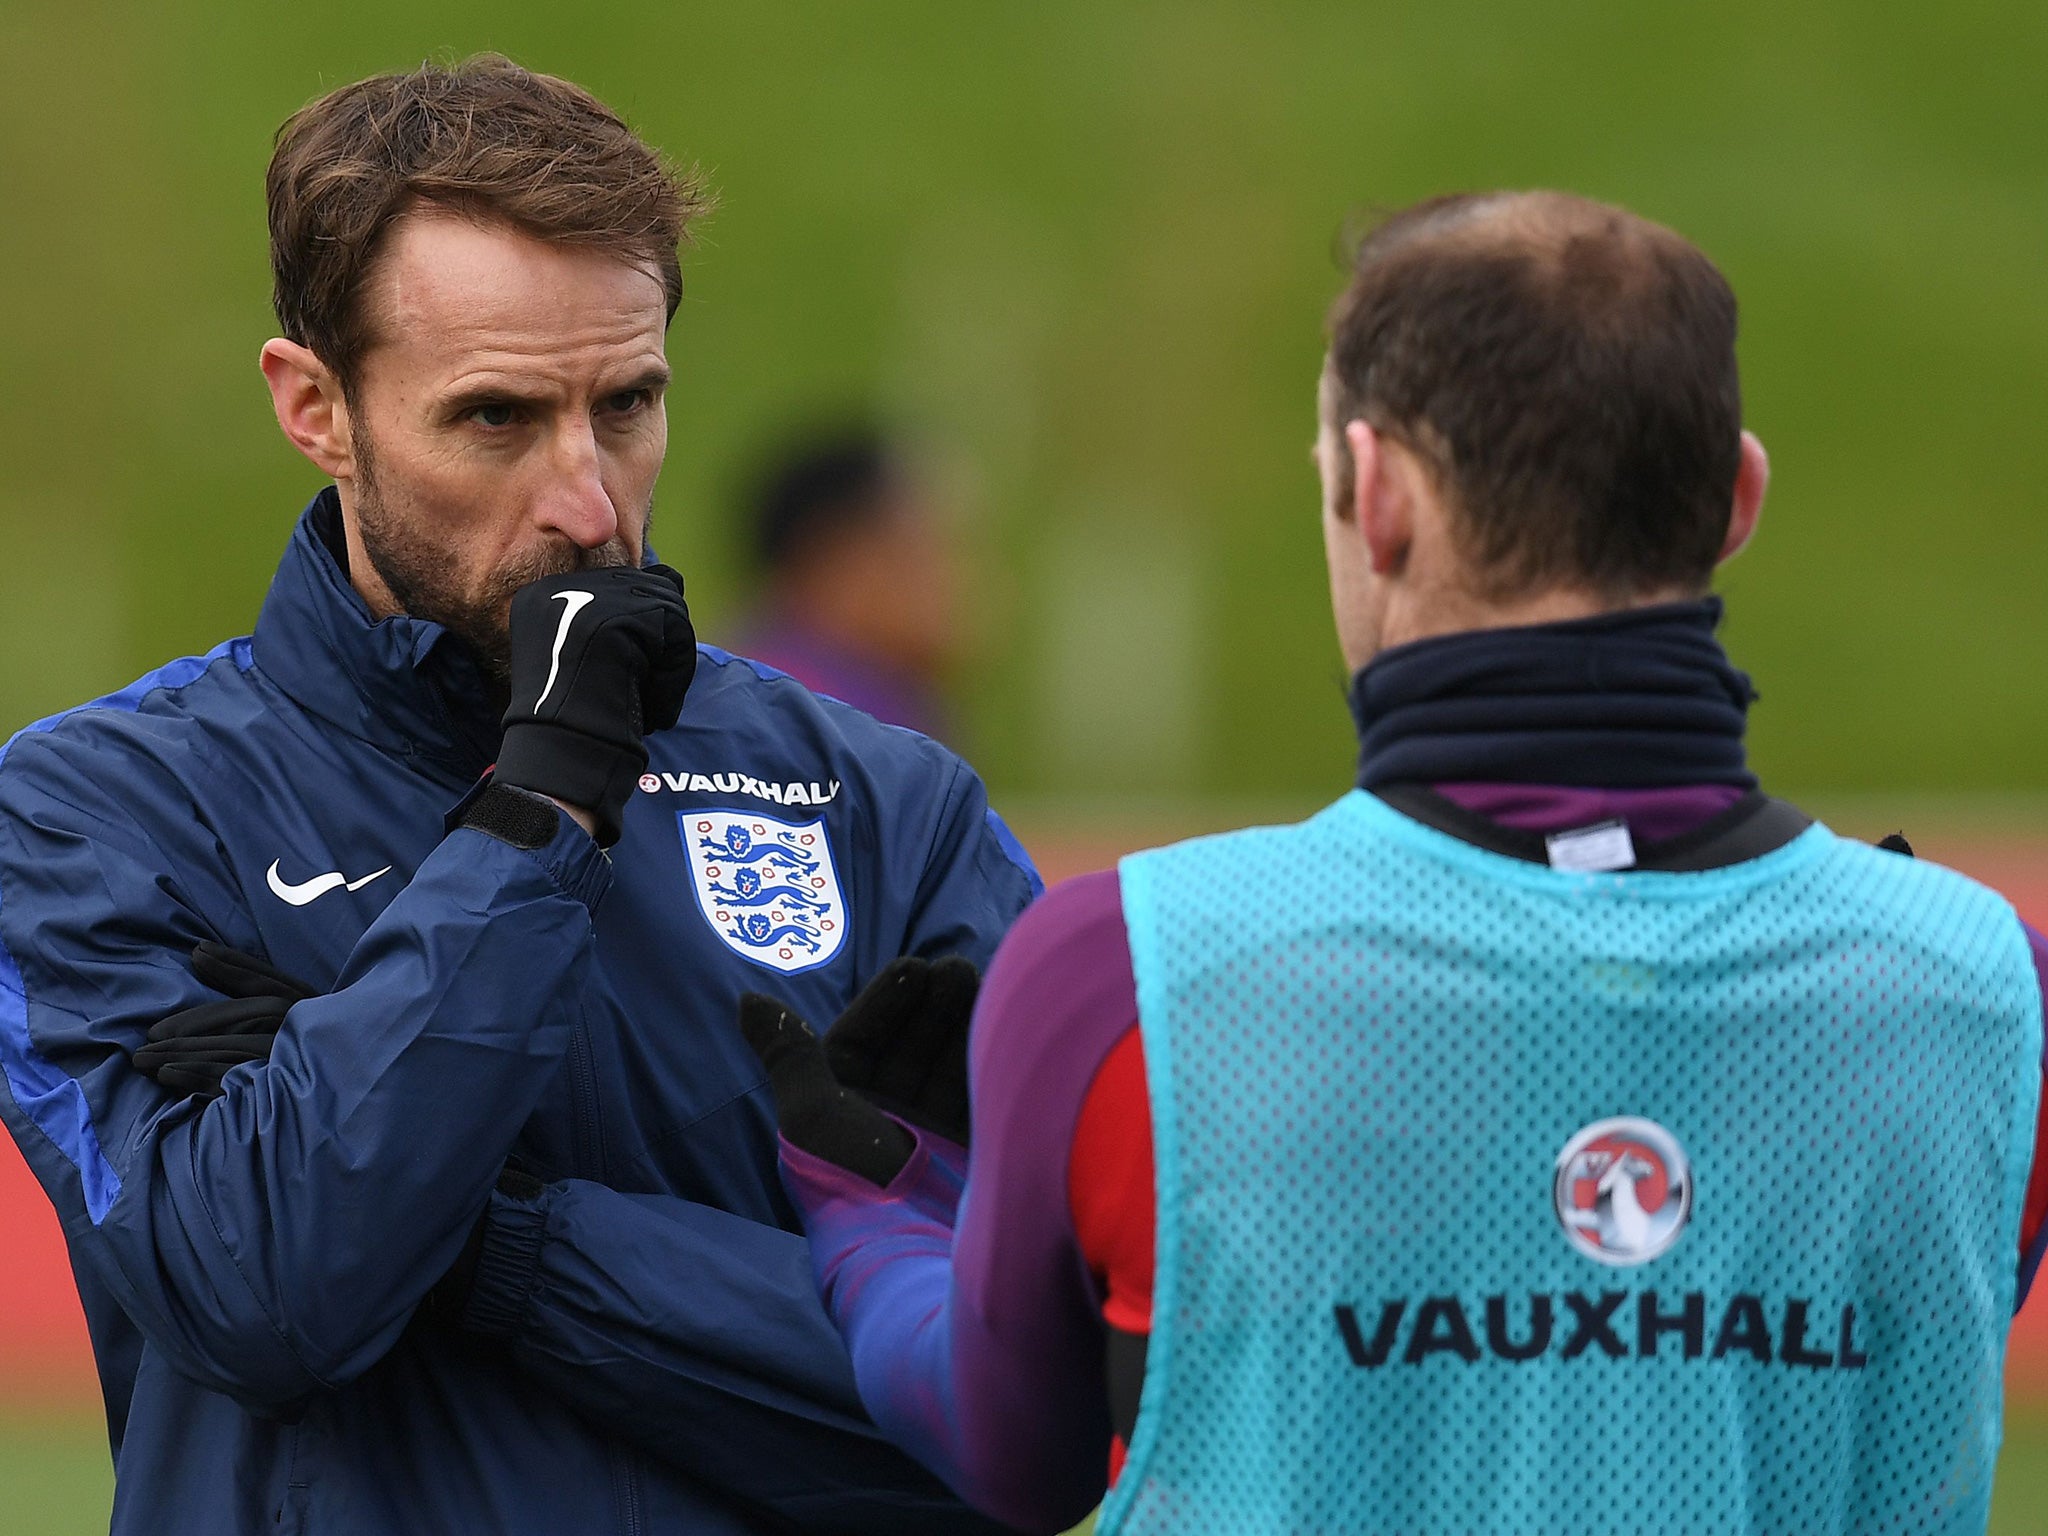 Southgate talks with Rooney during a training session at St George's Park